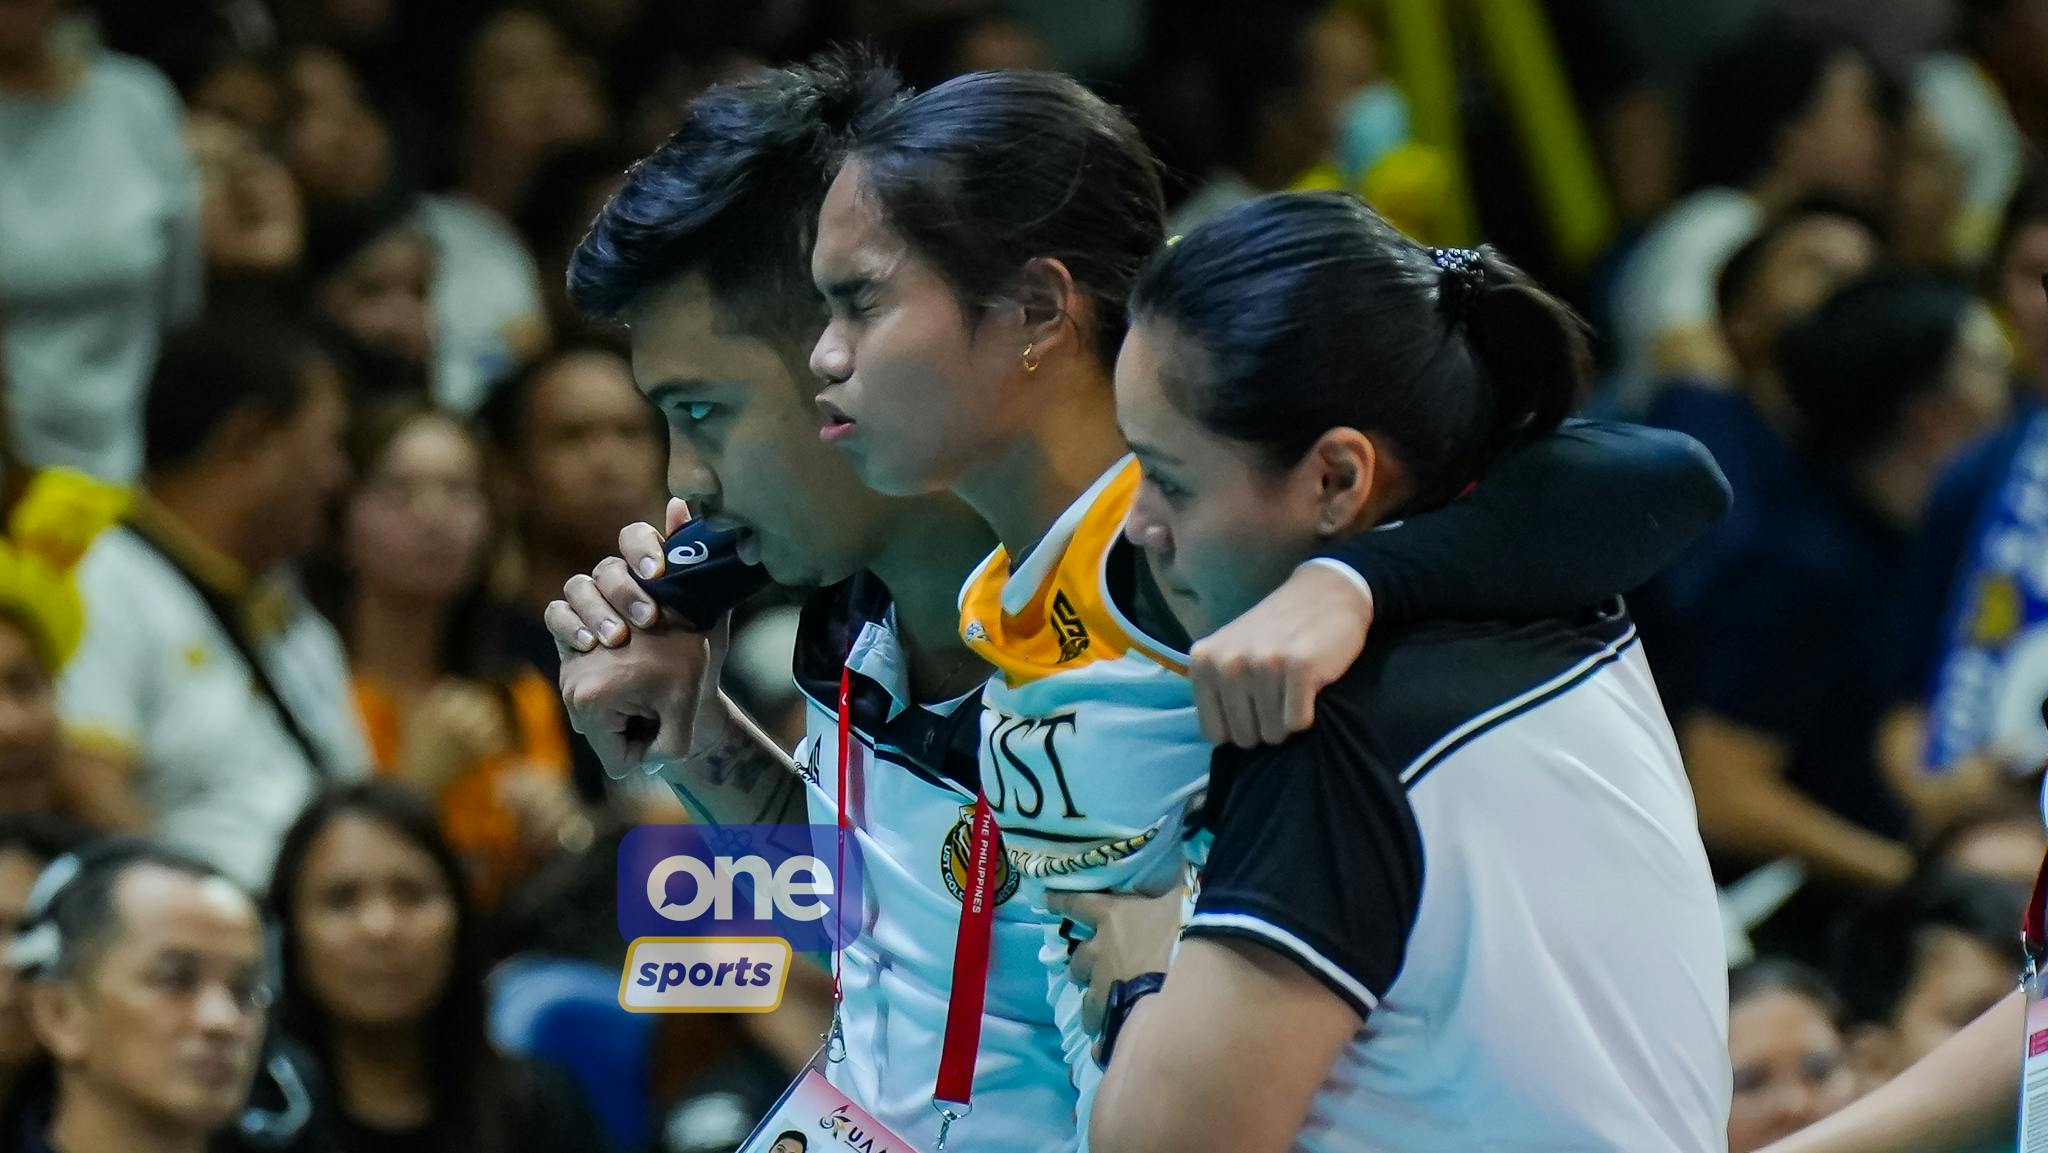 UAAP: UST star Angge Poyos exits Game 1 of the Finals after apparent ankle injury